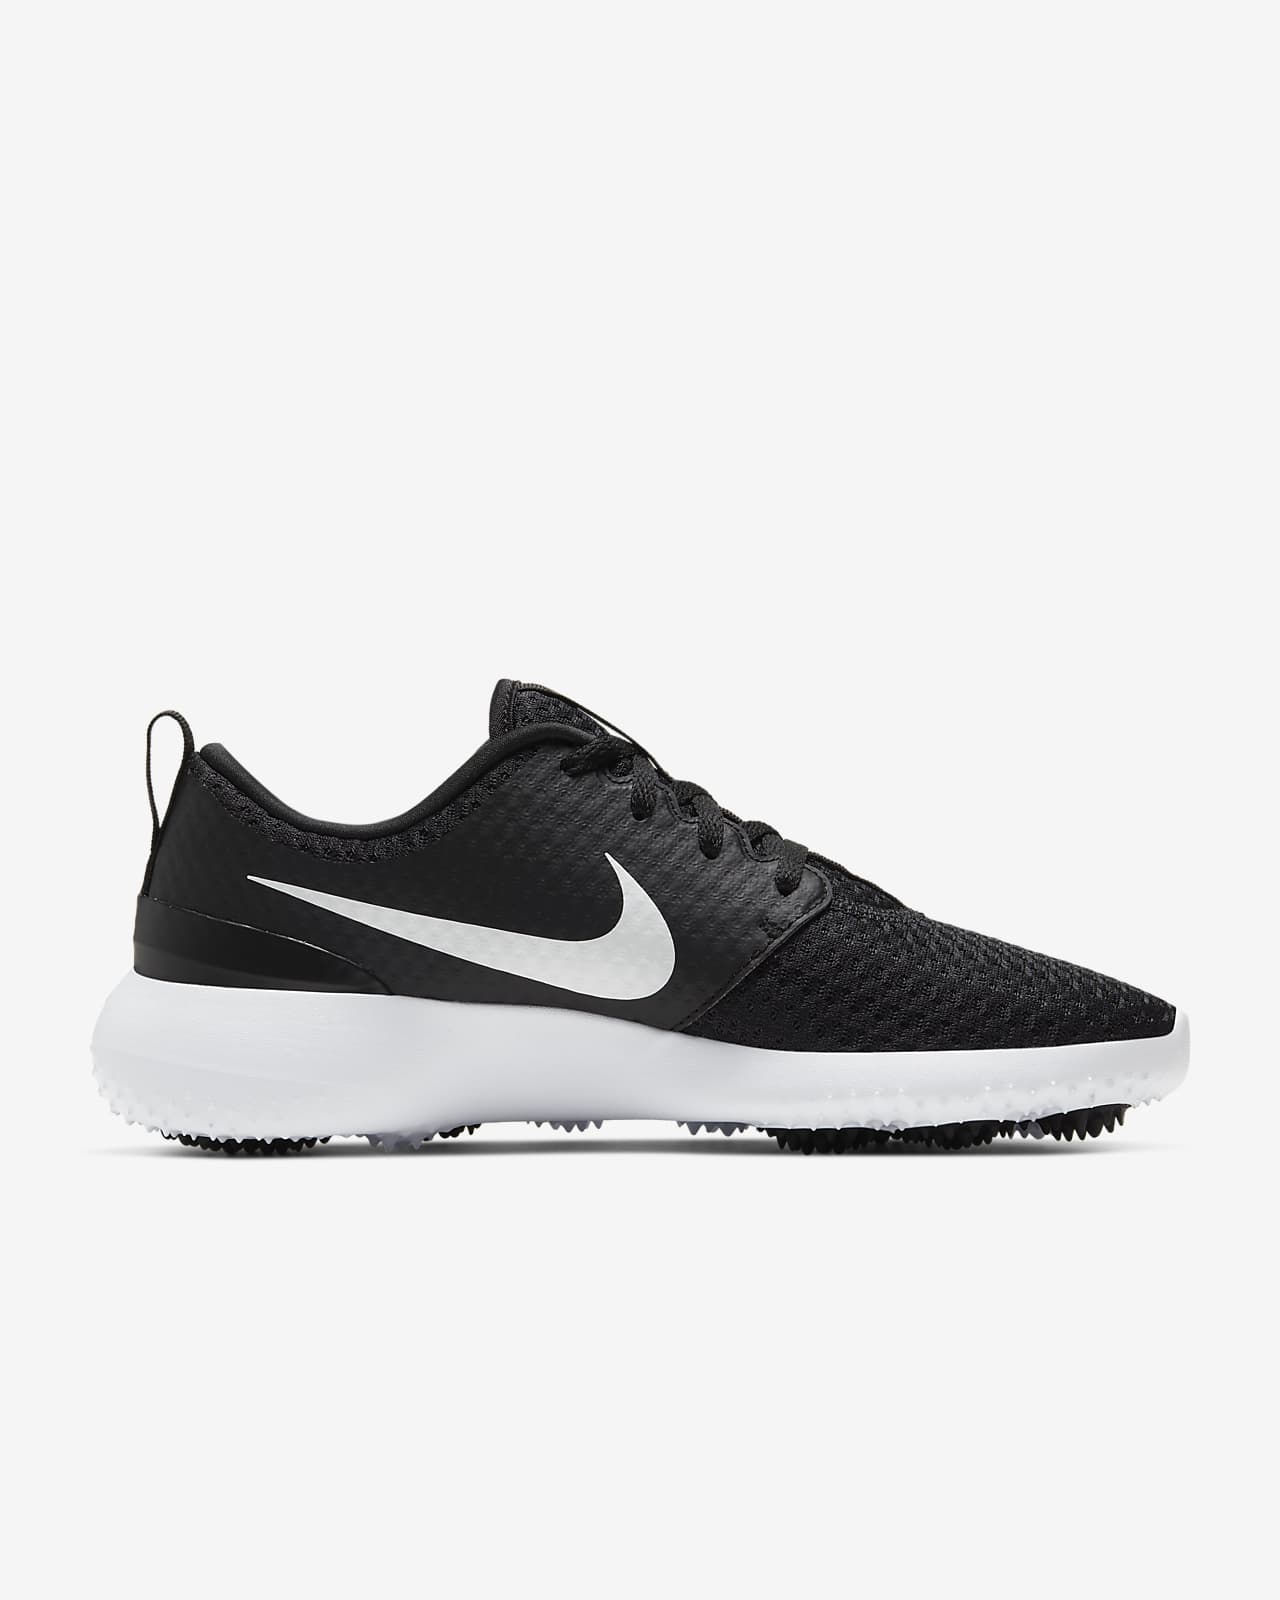 nike roshes shoes for women